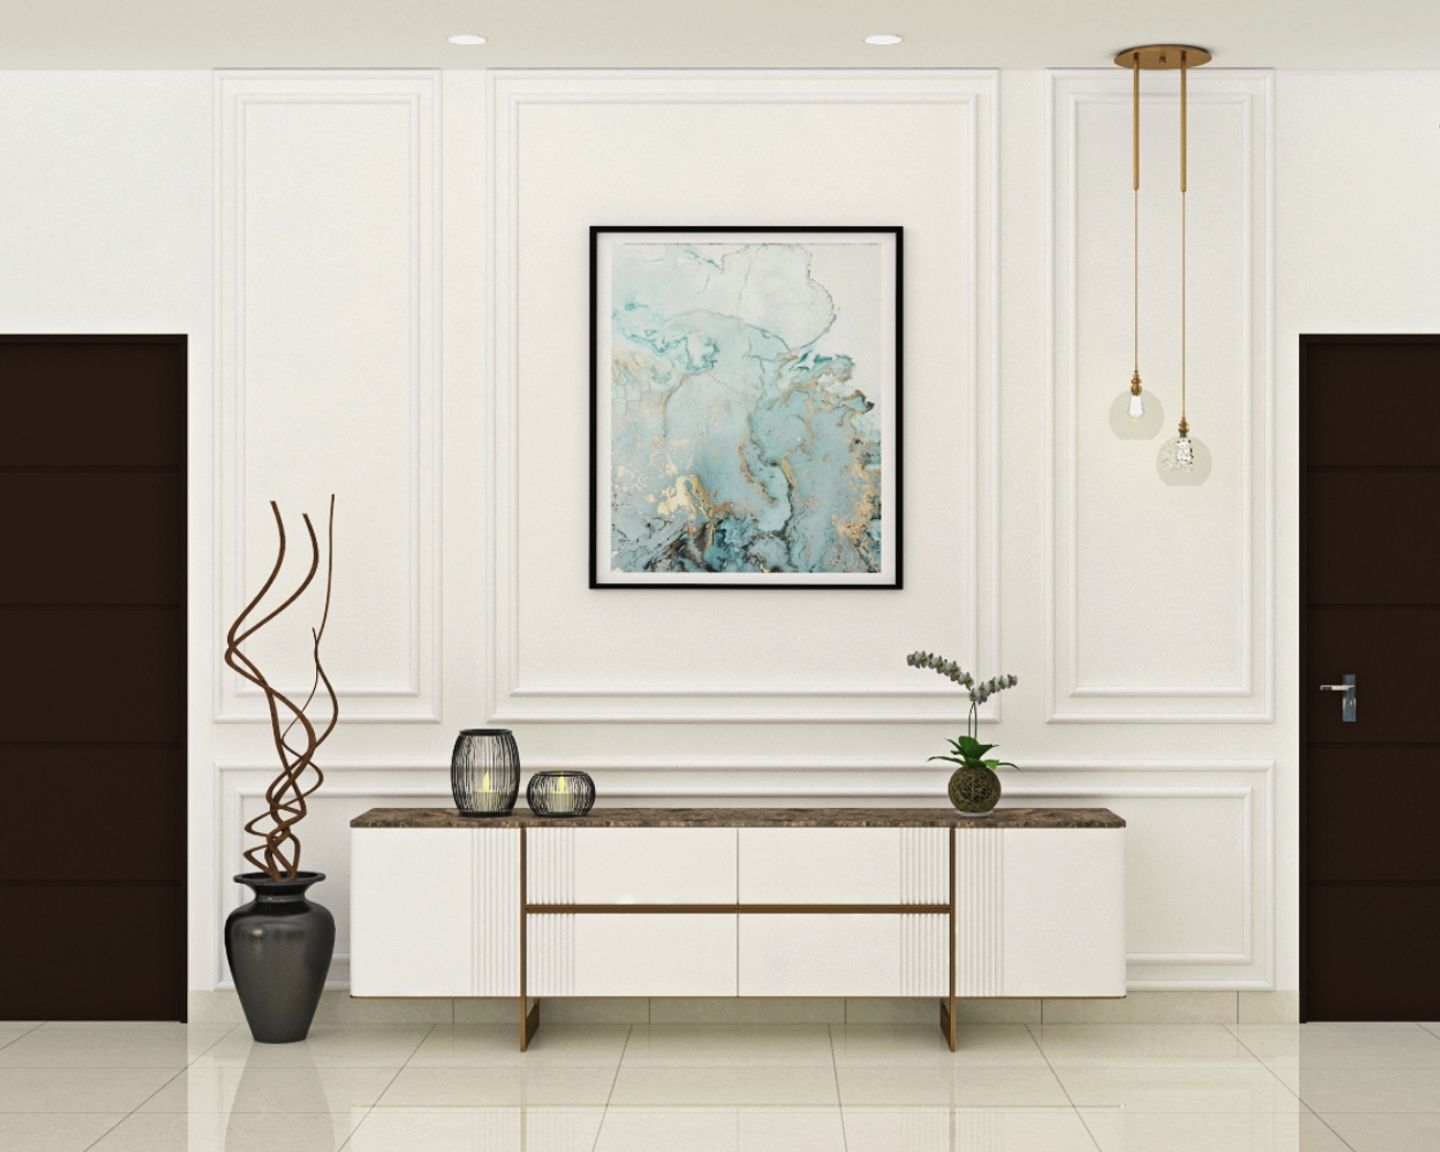 Frosty White And Brown Foyer Design With Abstract Wall Painting - Livspace